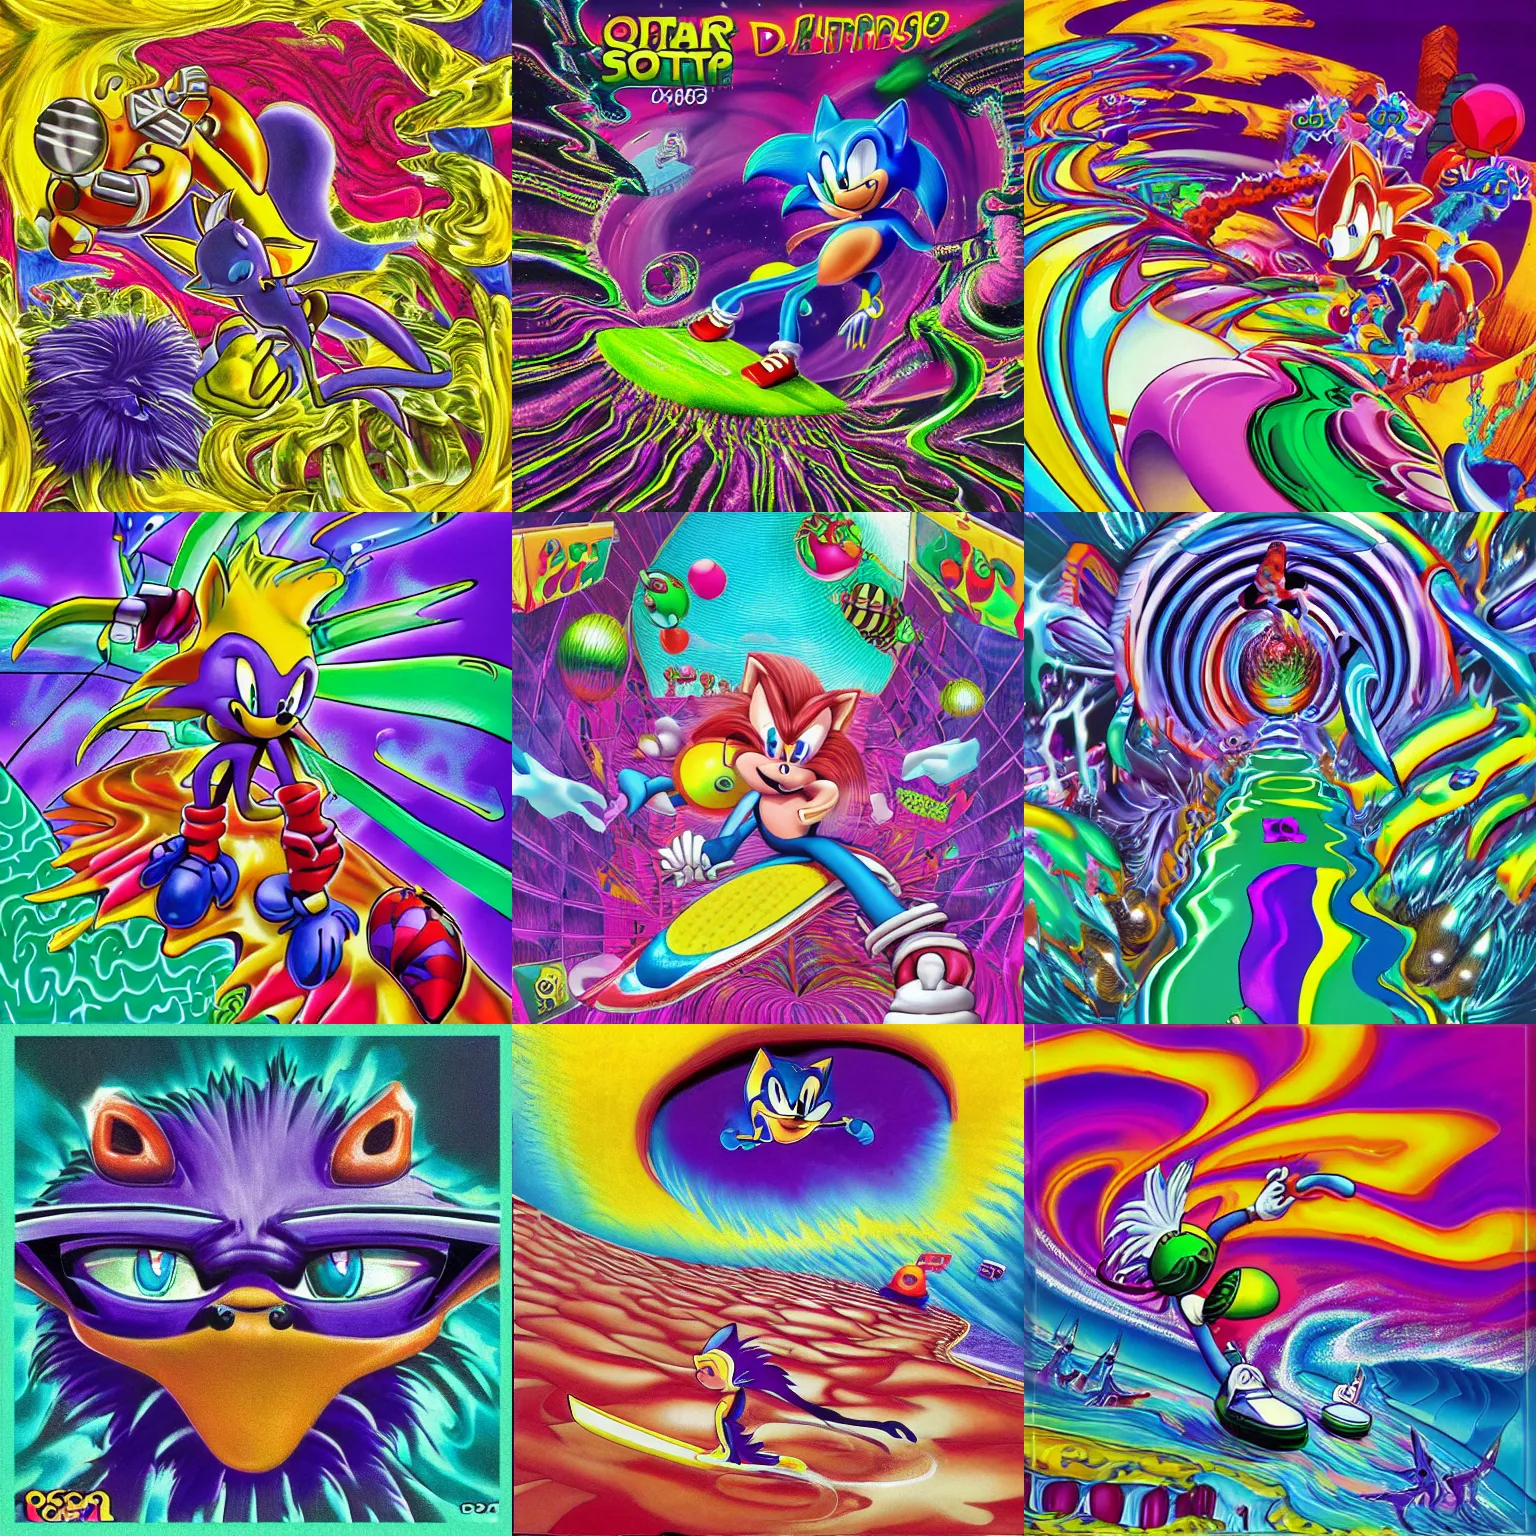 Prompt: surreal, sharp, detailed professional, high quality airbrush art MGMT album cover of a liquid dissolving LSD DMT sonic the hedgehog surfing through cyberspace, purple checkerboard background, 1990s 1992 Sega Genesis video game album cover